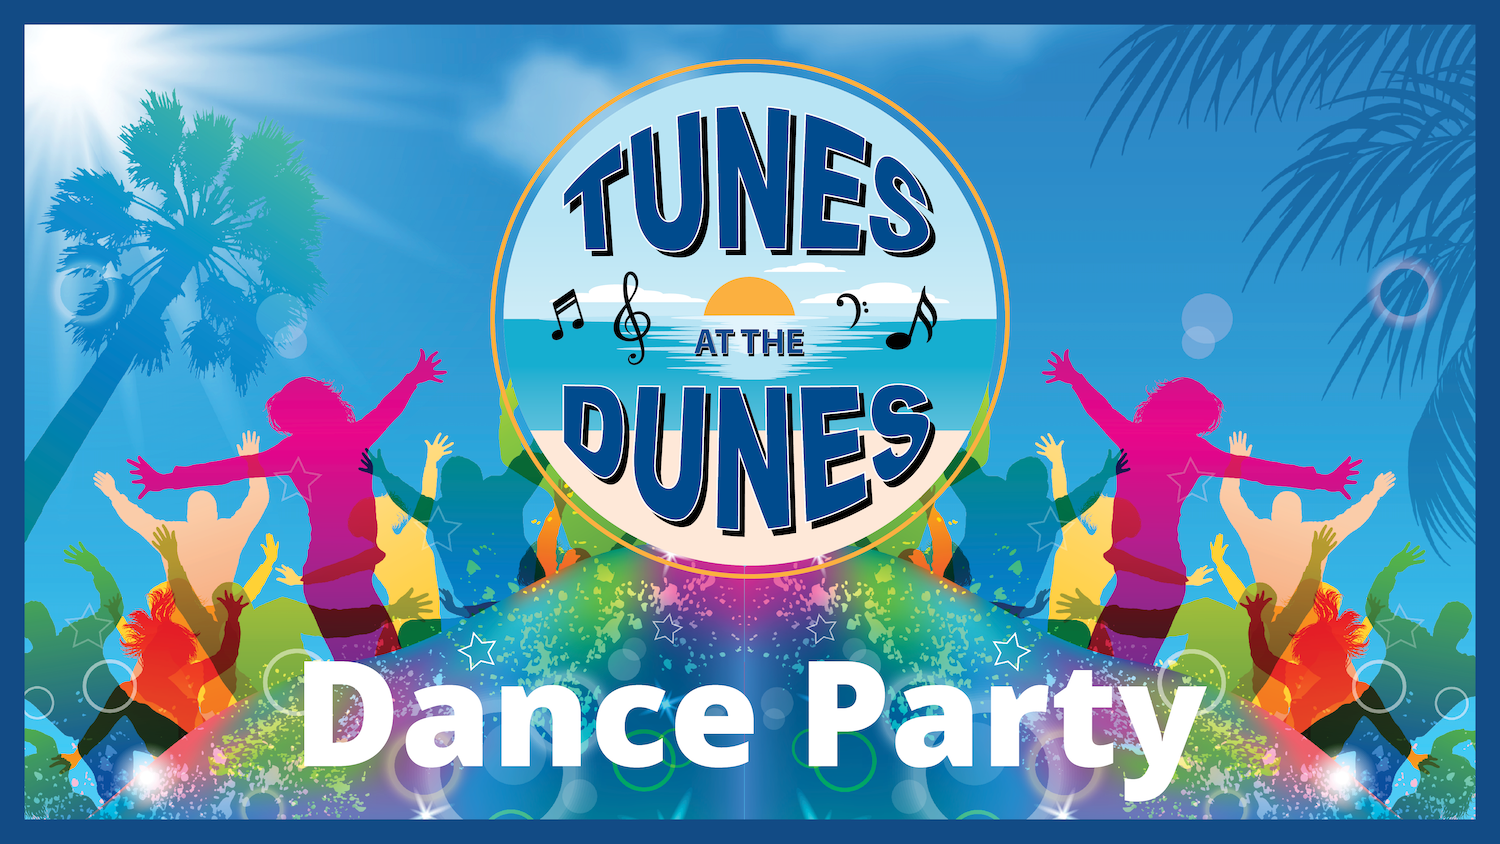 Tunes at the Dunes Dance Party